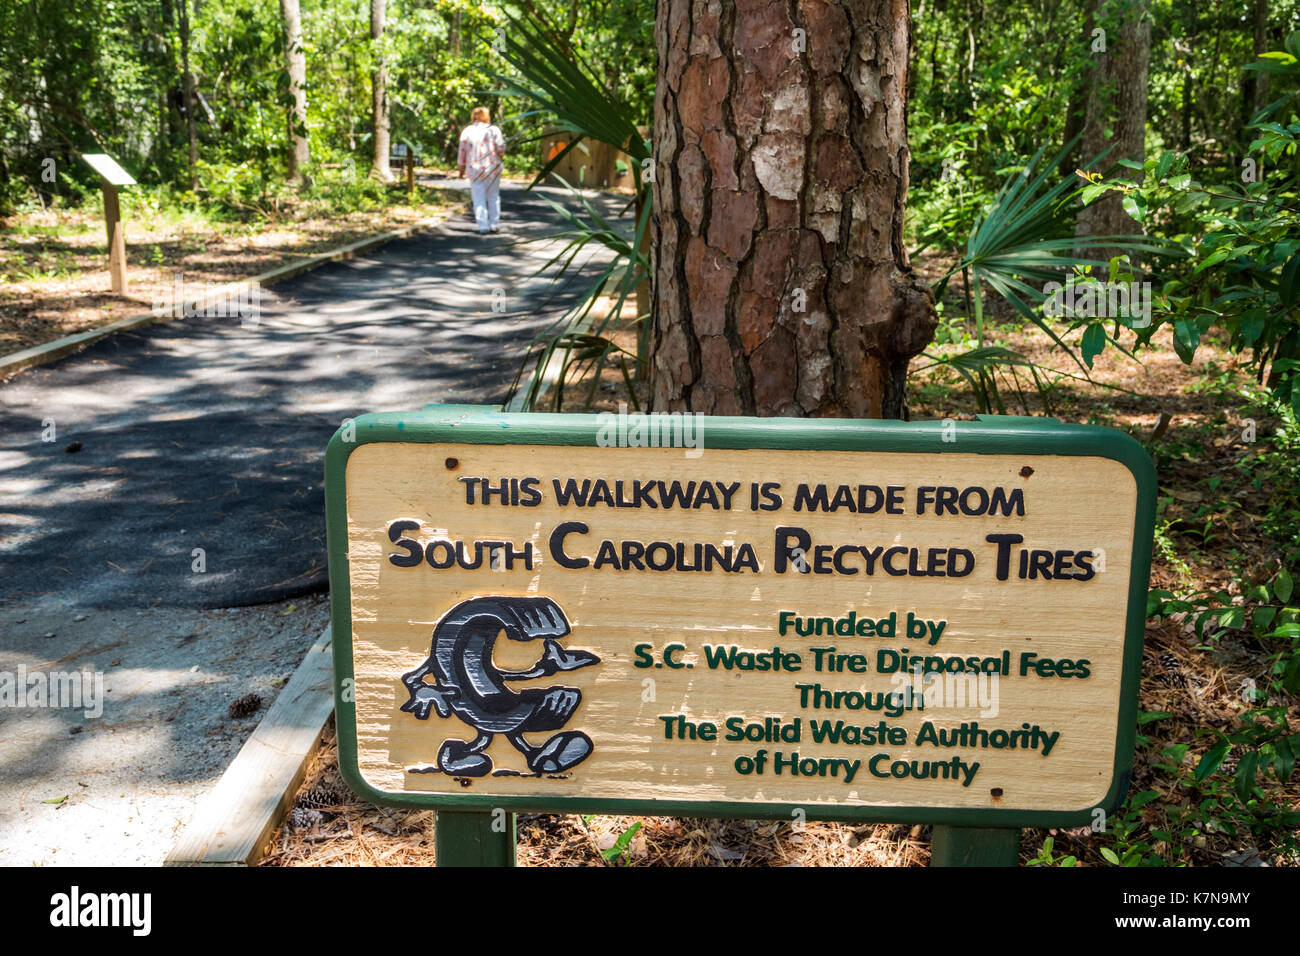 Myrtle Beach South Carolina,Myrtle Beach State Park,nature center,walkway,recycled tires,sign,SC170516124 Stock Photo